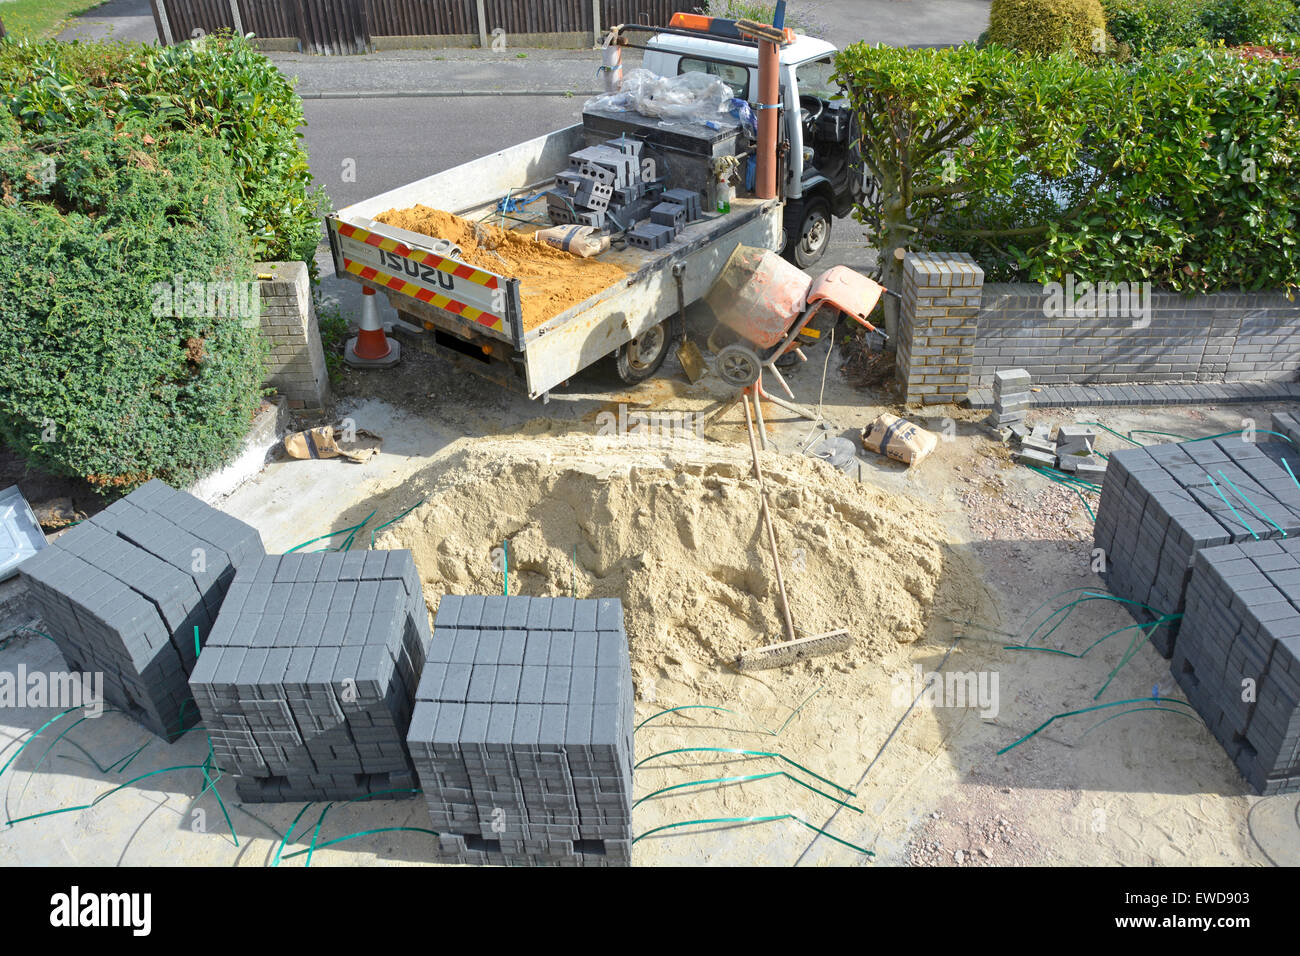 Home improvement front garden of residential property creating a new car driveway after removal of old concrete slab sand & paving block materials UK Stock Photo